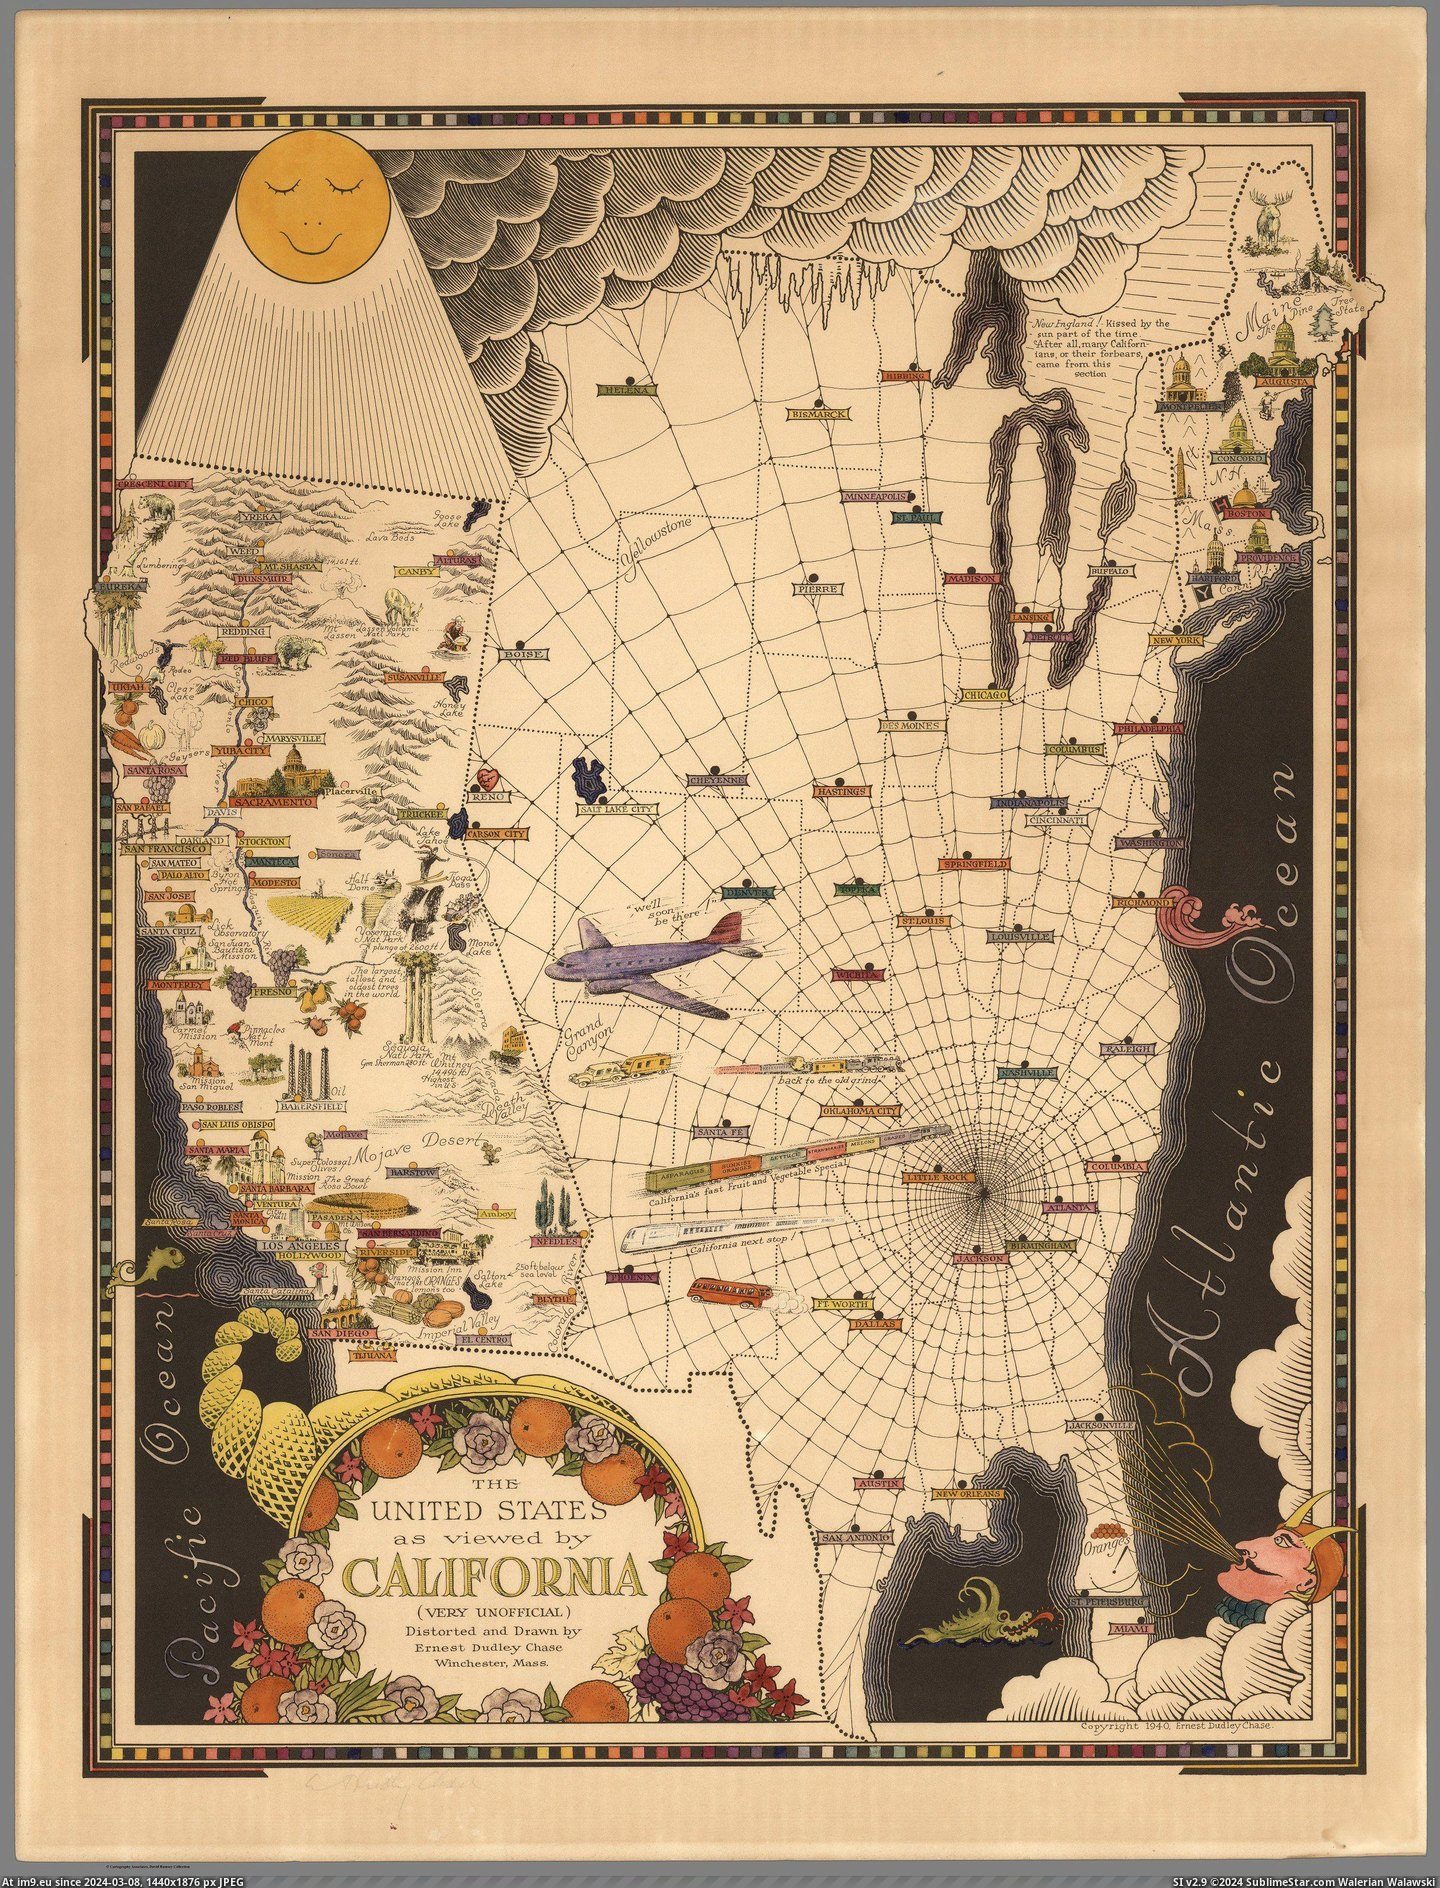 #California #States #Drawn #Viewed #Ernest #United #Chase [Mapporn] The United States as viewed by California (Very Unofficial). Distorted and drawn by Ernest Dudley Chase in 1940 [2428x Pic. (Image of album My r/MAPS favs))